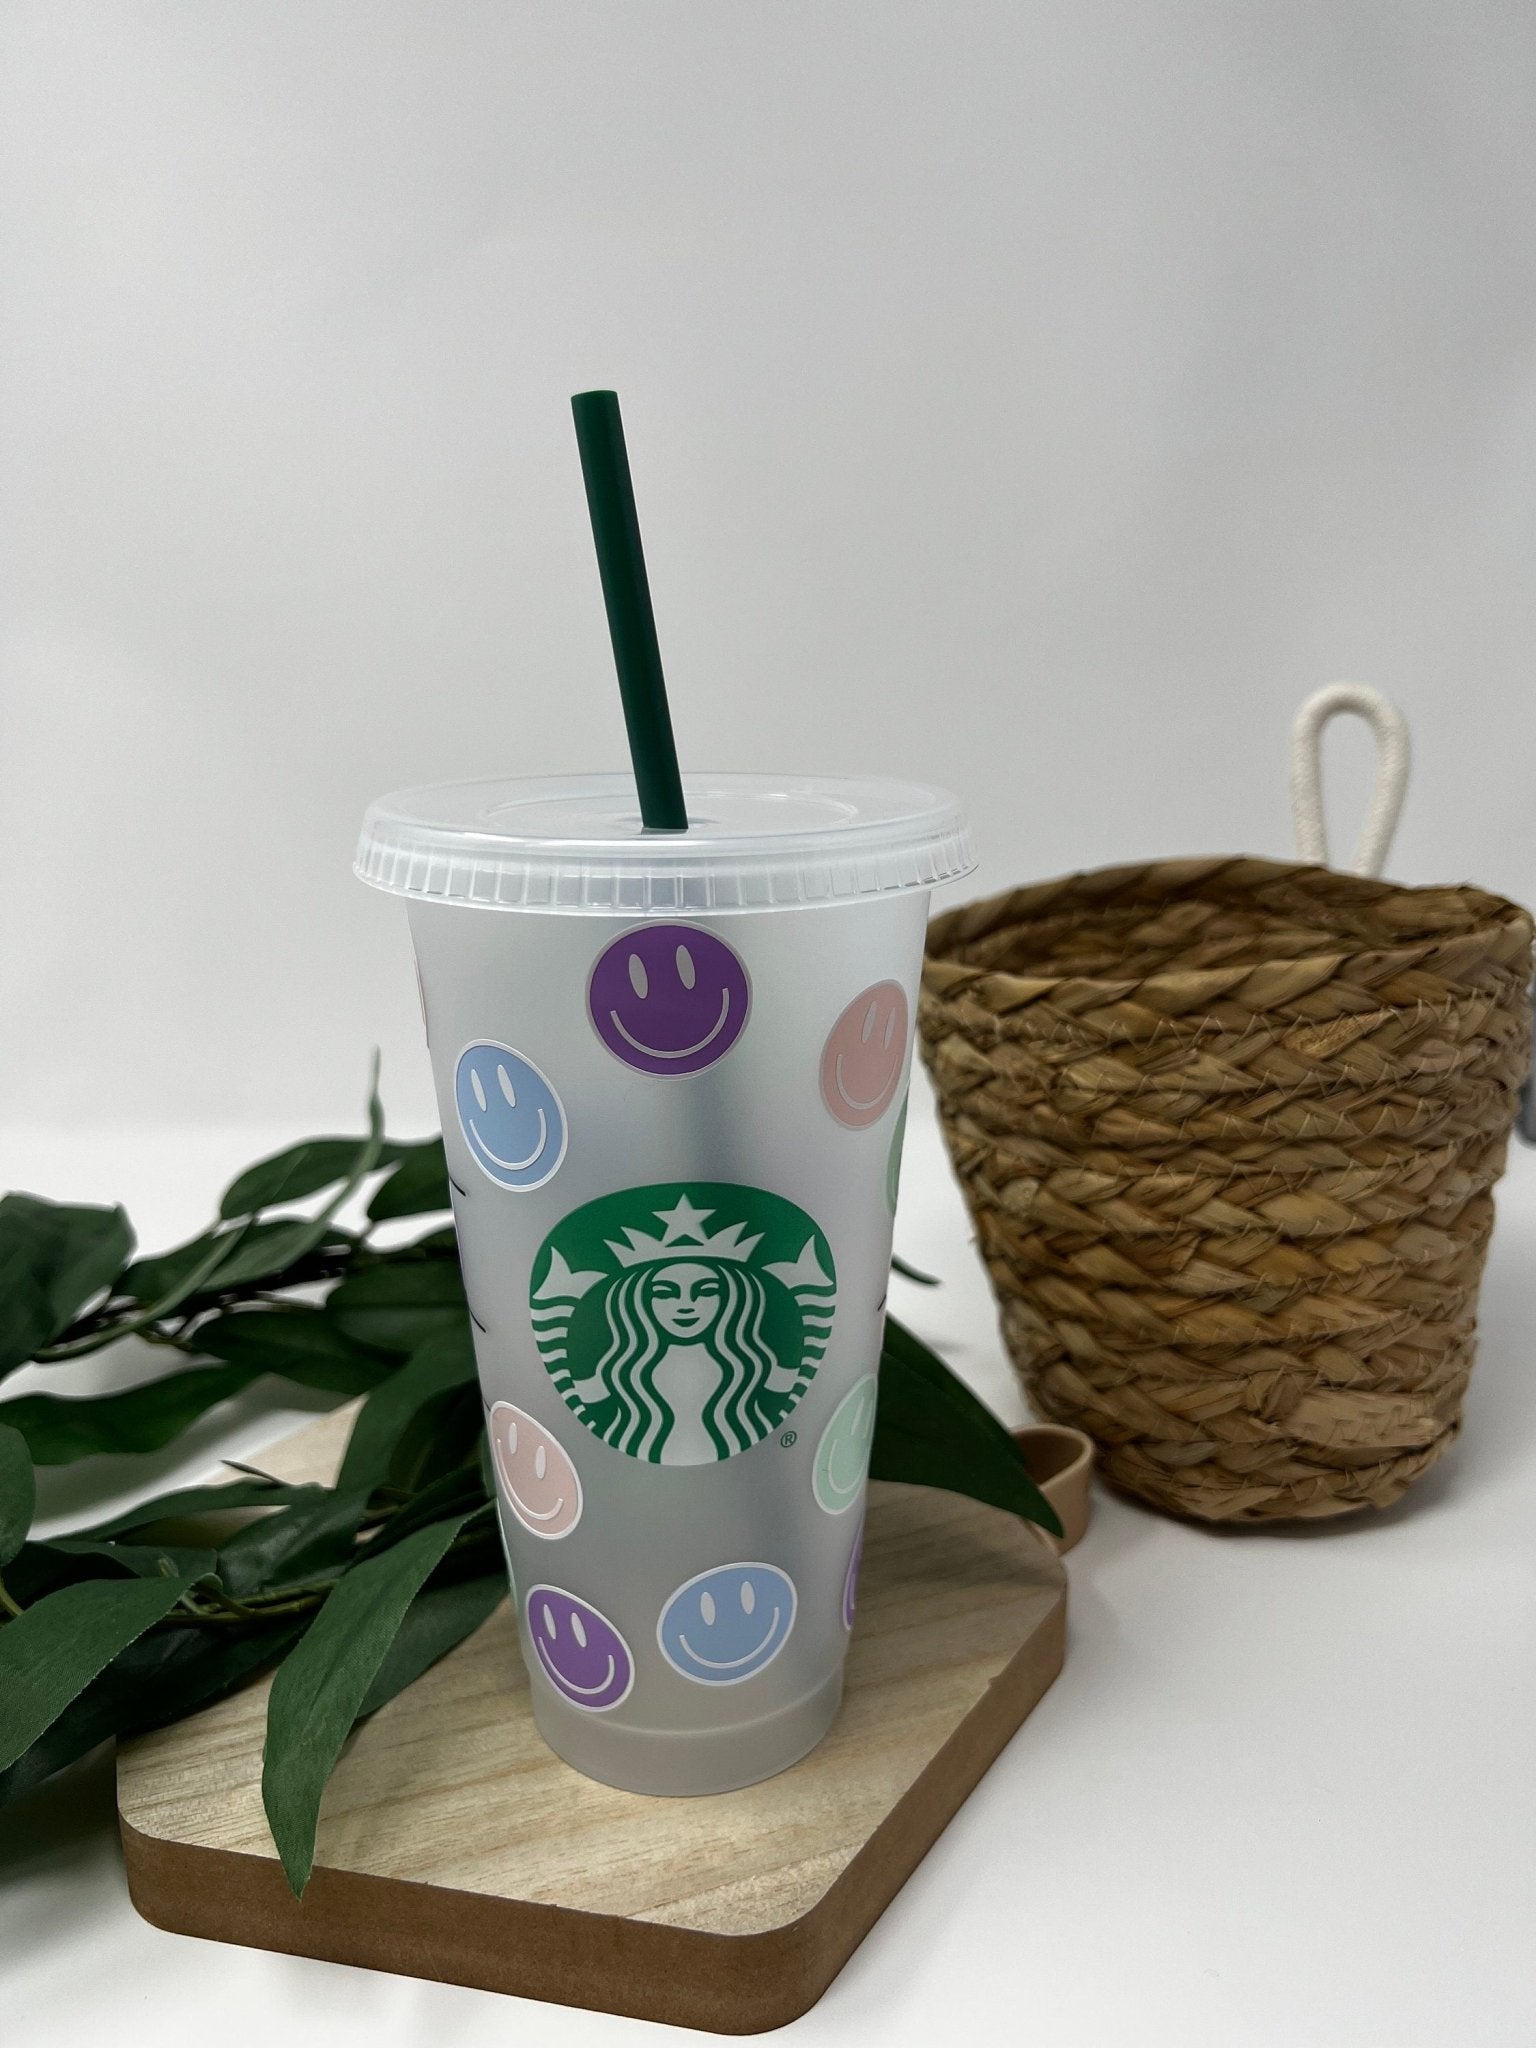 Starbucks mushroom collection SET venti cup, water bottle, reusable